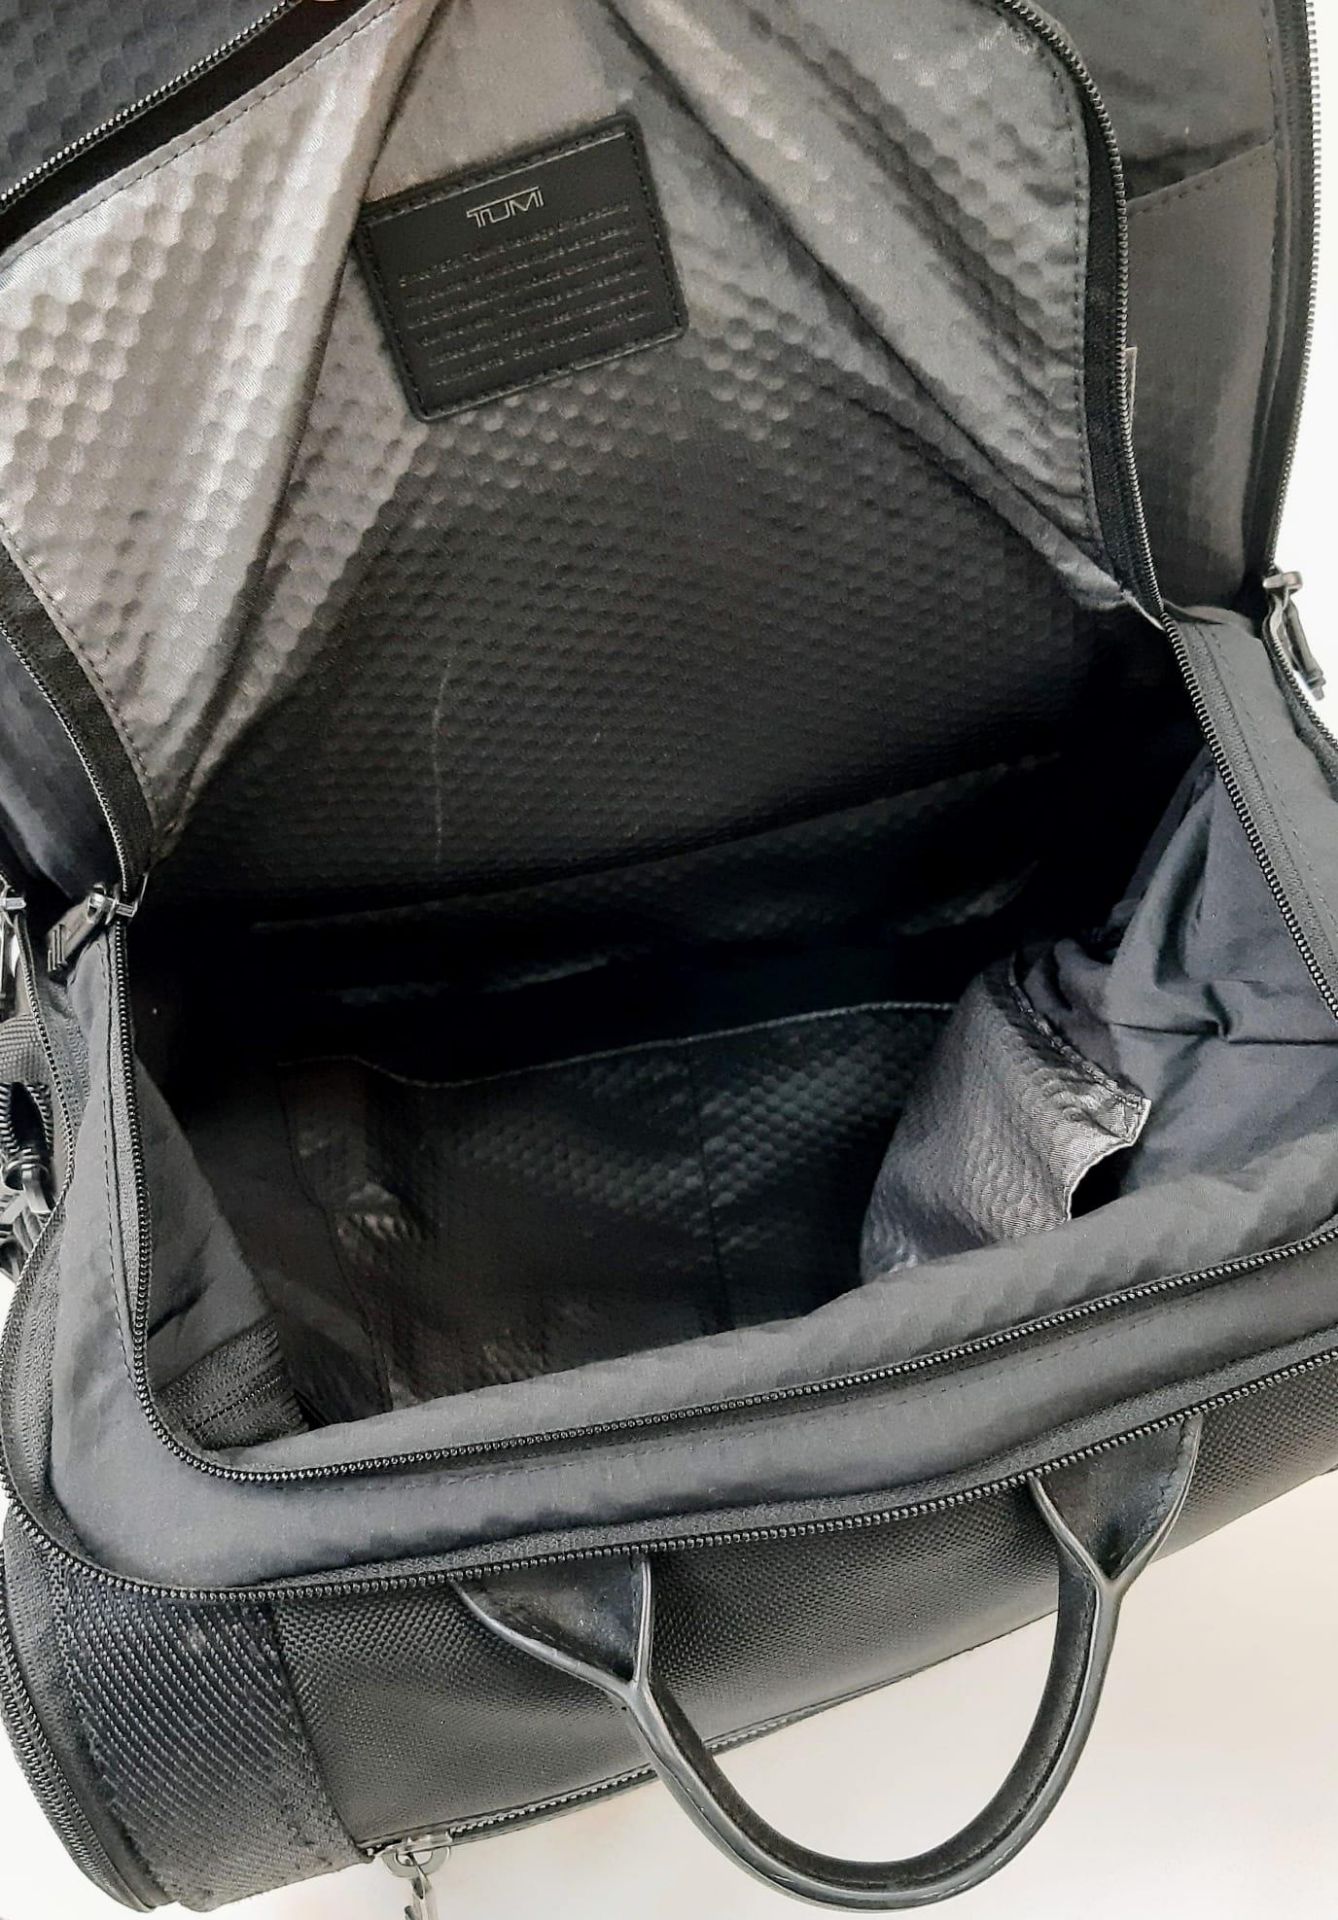 A TUMI Lark Black Backpack, 23L Capacity, Pockets for 16" Laptop, Tablet, Phone and Water Bottle. - Bild 6 aus 6